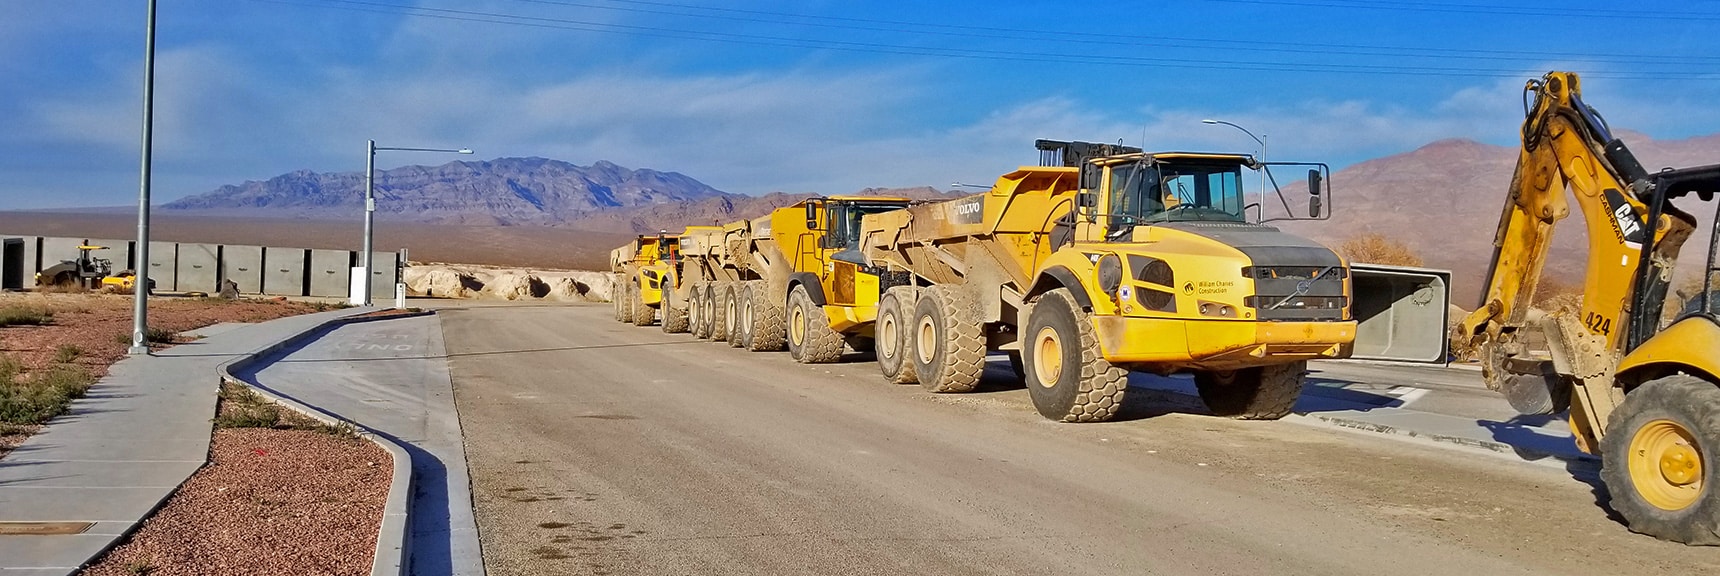 Construction Equipment at the North End of Durango Road at Tule Springs Fossil Beds | Snapshot of Las Vegas Northern Growth Edge on January 3, 2021